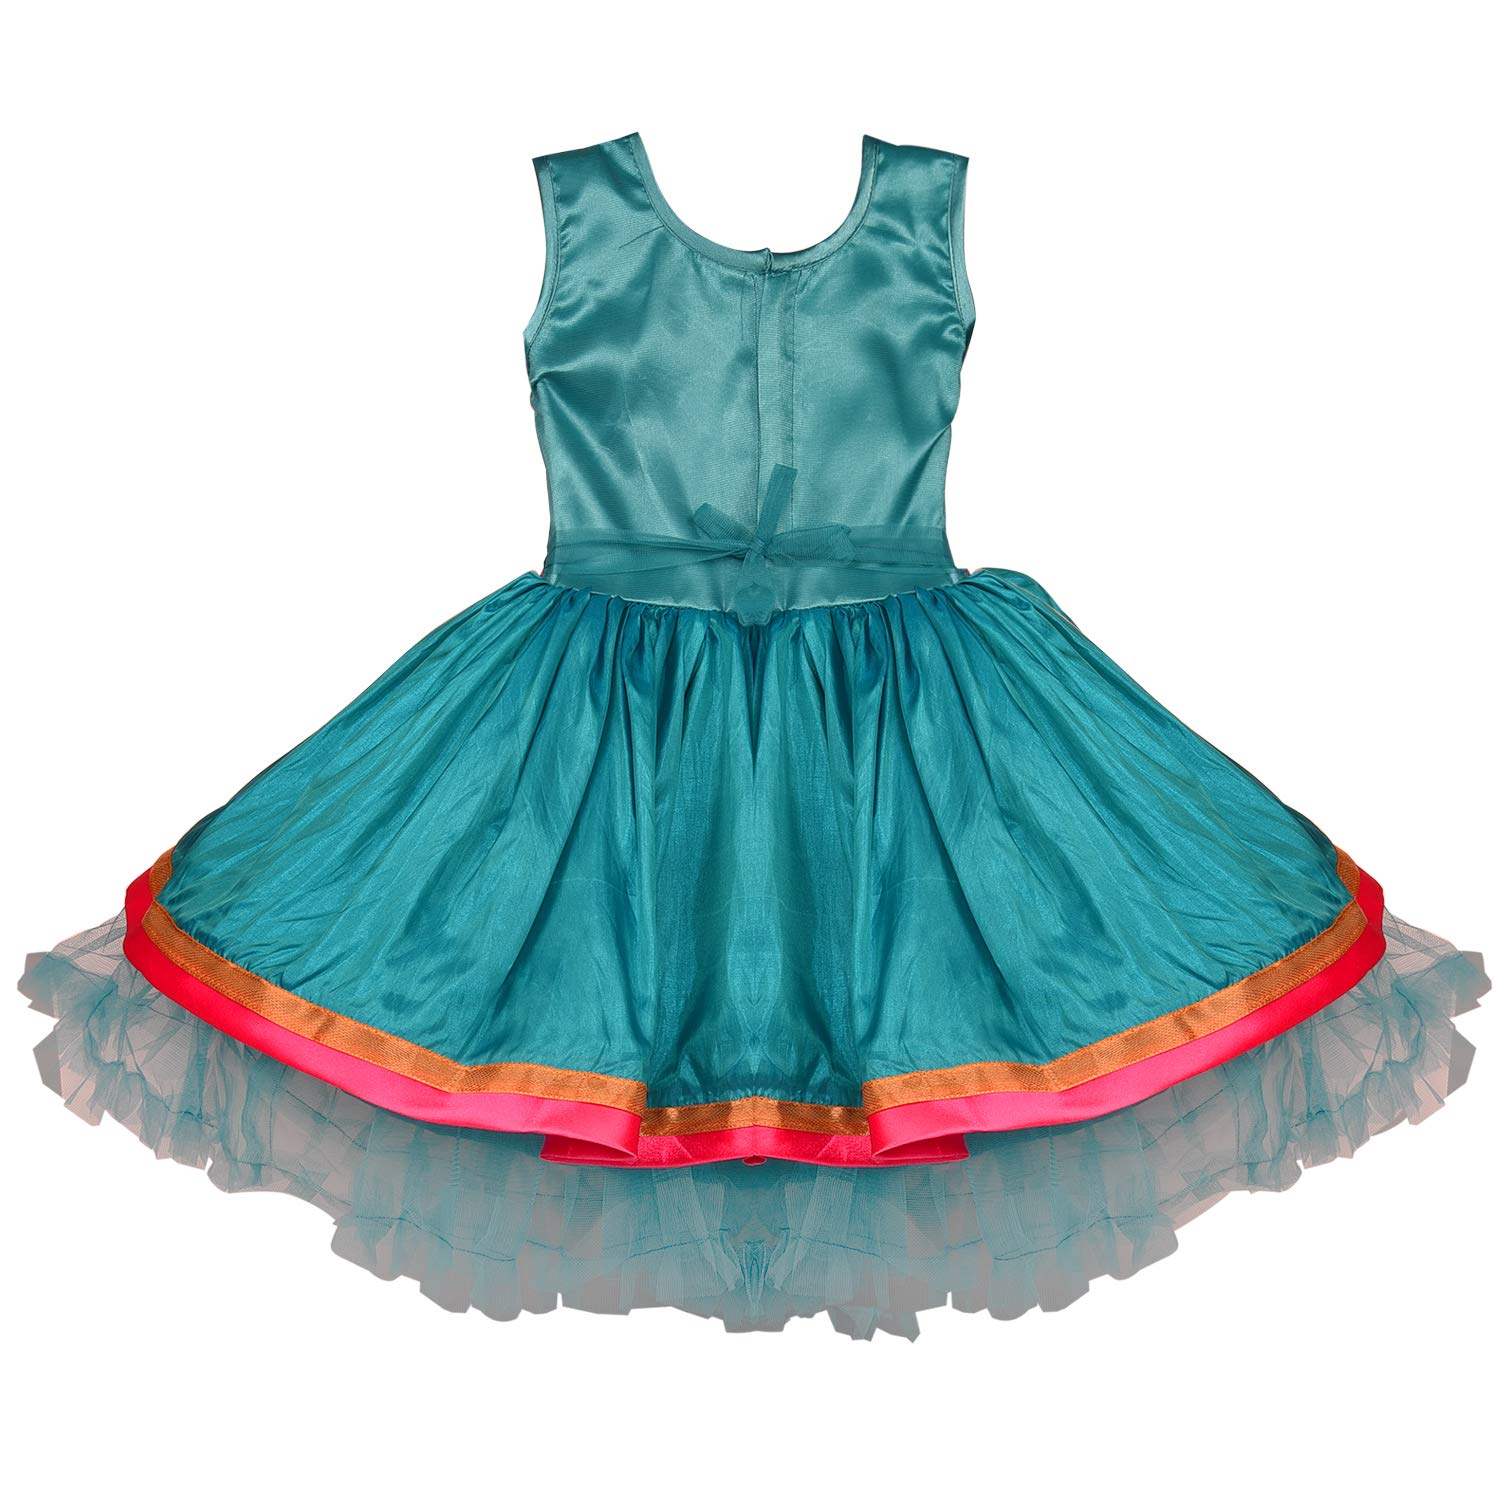 Baby Girls Party Wear Frock Birthday Dress For Girls fe2651grn - Wish Karo Party Wear - frocks Party Wear - baby dress